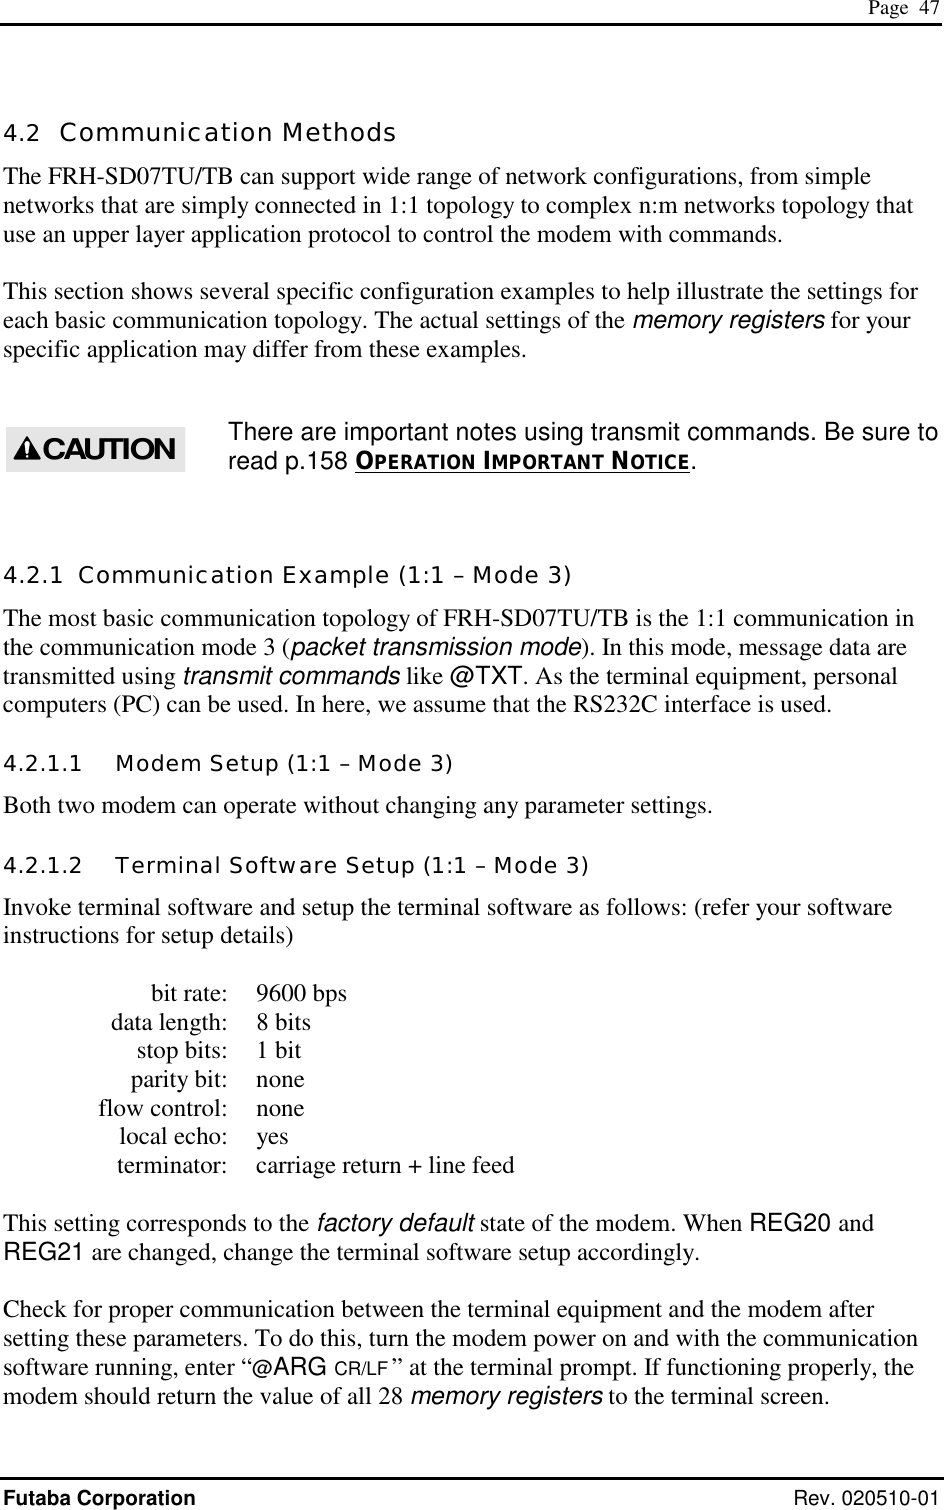  Page  47 Futaba Corporation Rev. 020510-01 4.2  Communication Methods The FRH-SD07TU/TB can support wide range of network configurations, from simple networks that are simply connected in 1:1 topology to complex n:m networks topology that use an upper layer application protocol to control the modem with commands.  This section shows several specific configuration examples to help illustrate the settings for each basic communication topology. The actual settings of the memory registers for your specific application may differ from these examples.  There are important notes using transmit commands. Be sure to read p.158 OPERATION IMPORTANT NOTICE.  4.2.1  Communication Example (1:1 – Mode 3) The most basic communication topology of FRH-SD07TU/TB is the 1:1 communication in the communication mode 3 (packet transmission mode). In this mode, message data are transmitted using transmit commands like @TXT. As the terminal equipment, personal computers (PC) can be used. In here, we assume that the RS232C interface is used. 4.2.1.1   Modem Setup (1:1 – Mode 3) Both two modem can operate without changing any parameter settings. 4.2.1.2   Terminal Software Setup (1:1 – Mode 3) Invoke terminal software and setup the terminal software as follows: (refer your software instructions for setup details)    bit rate:  9600 bps   data length:  8 bits   stop bits:  1 bit  parity bit: none  flow control: none  local echo: yes   terminator:  carriage return + line feed  This setting corresponds to the factory default state of the modem. When REG20 and REG21 are changed, change the terminal software setup accordingly.   Check for proper communication between the terminal equipment and the modem after setting these parameters. To do this, turn the modem power on and with the communication software running, enter “@ARG CR/LF ” at the terminal prompt. If functioning properly, the modem should return the value of all 28 memory registers to the terminal screen. CAUTION